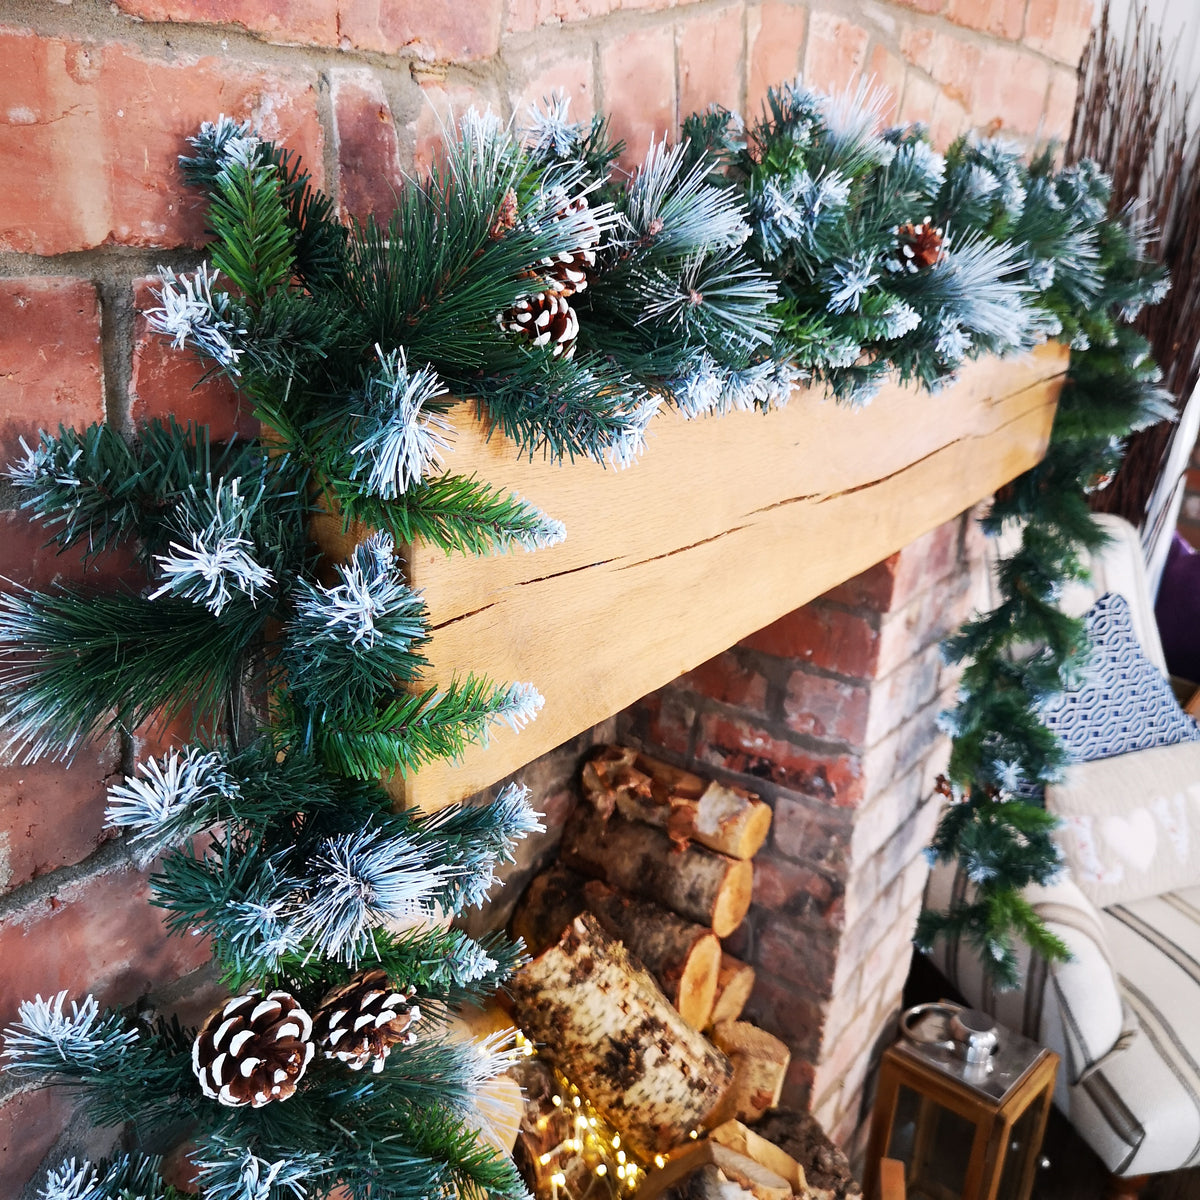 270cm x 25cm Frosted Glacier Christmas Garland with Pine Cones